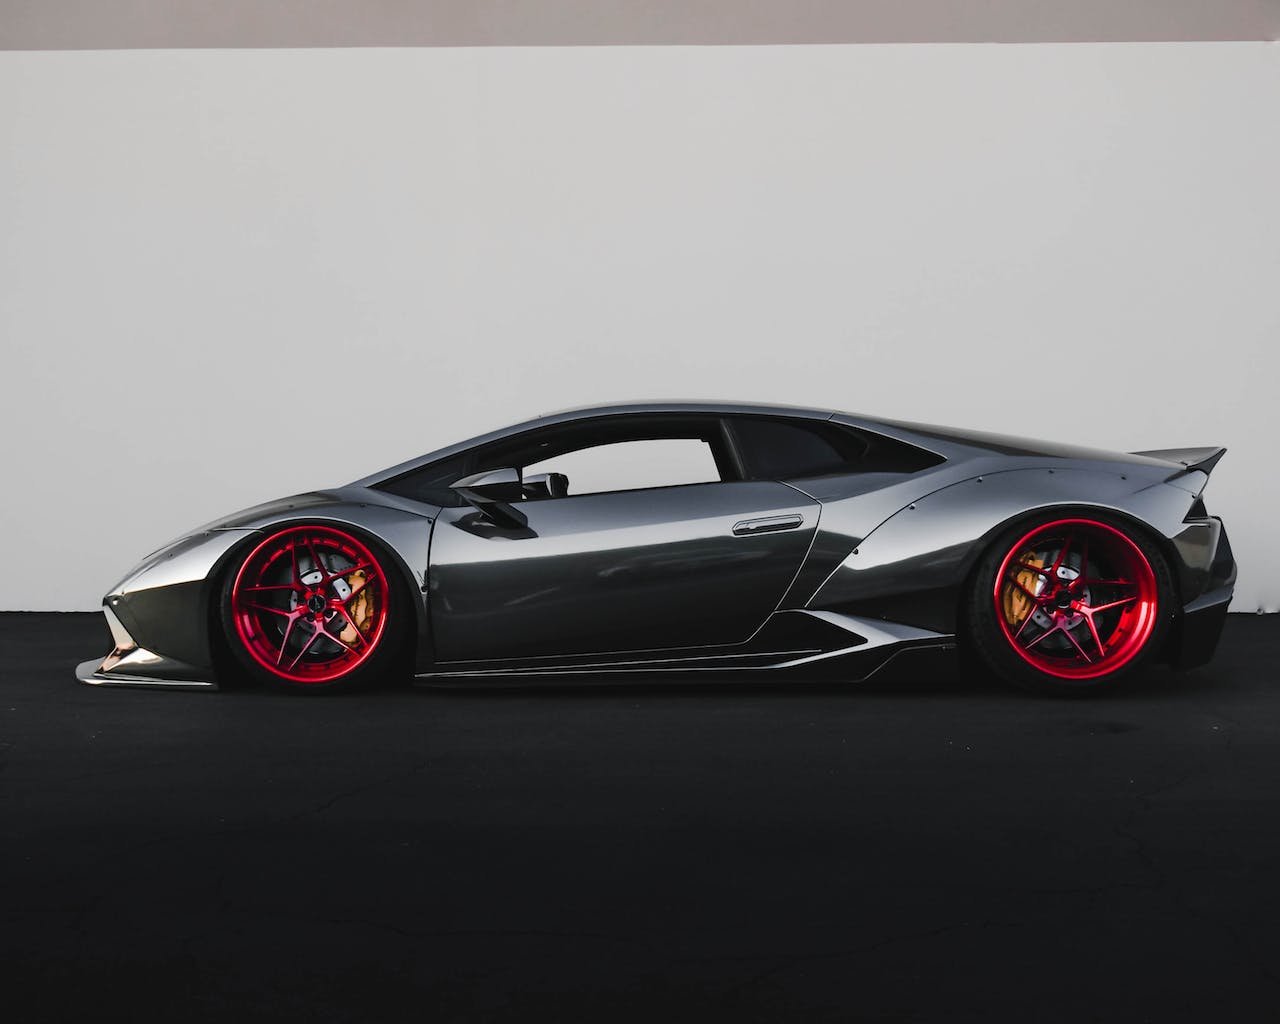 Pricey Wheels: 8 of the Most Expensive Cars You Can Buy